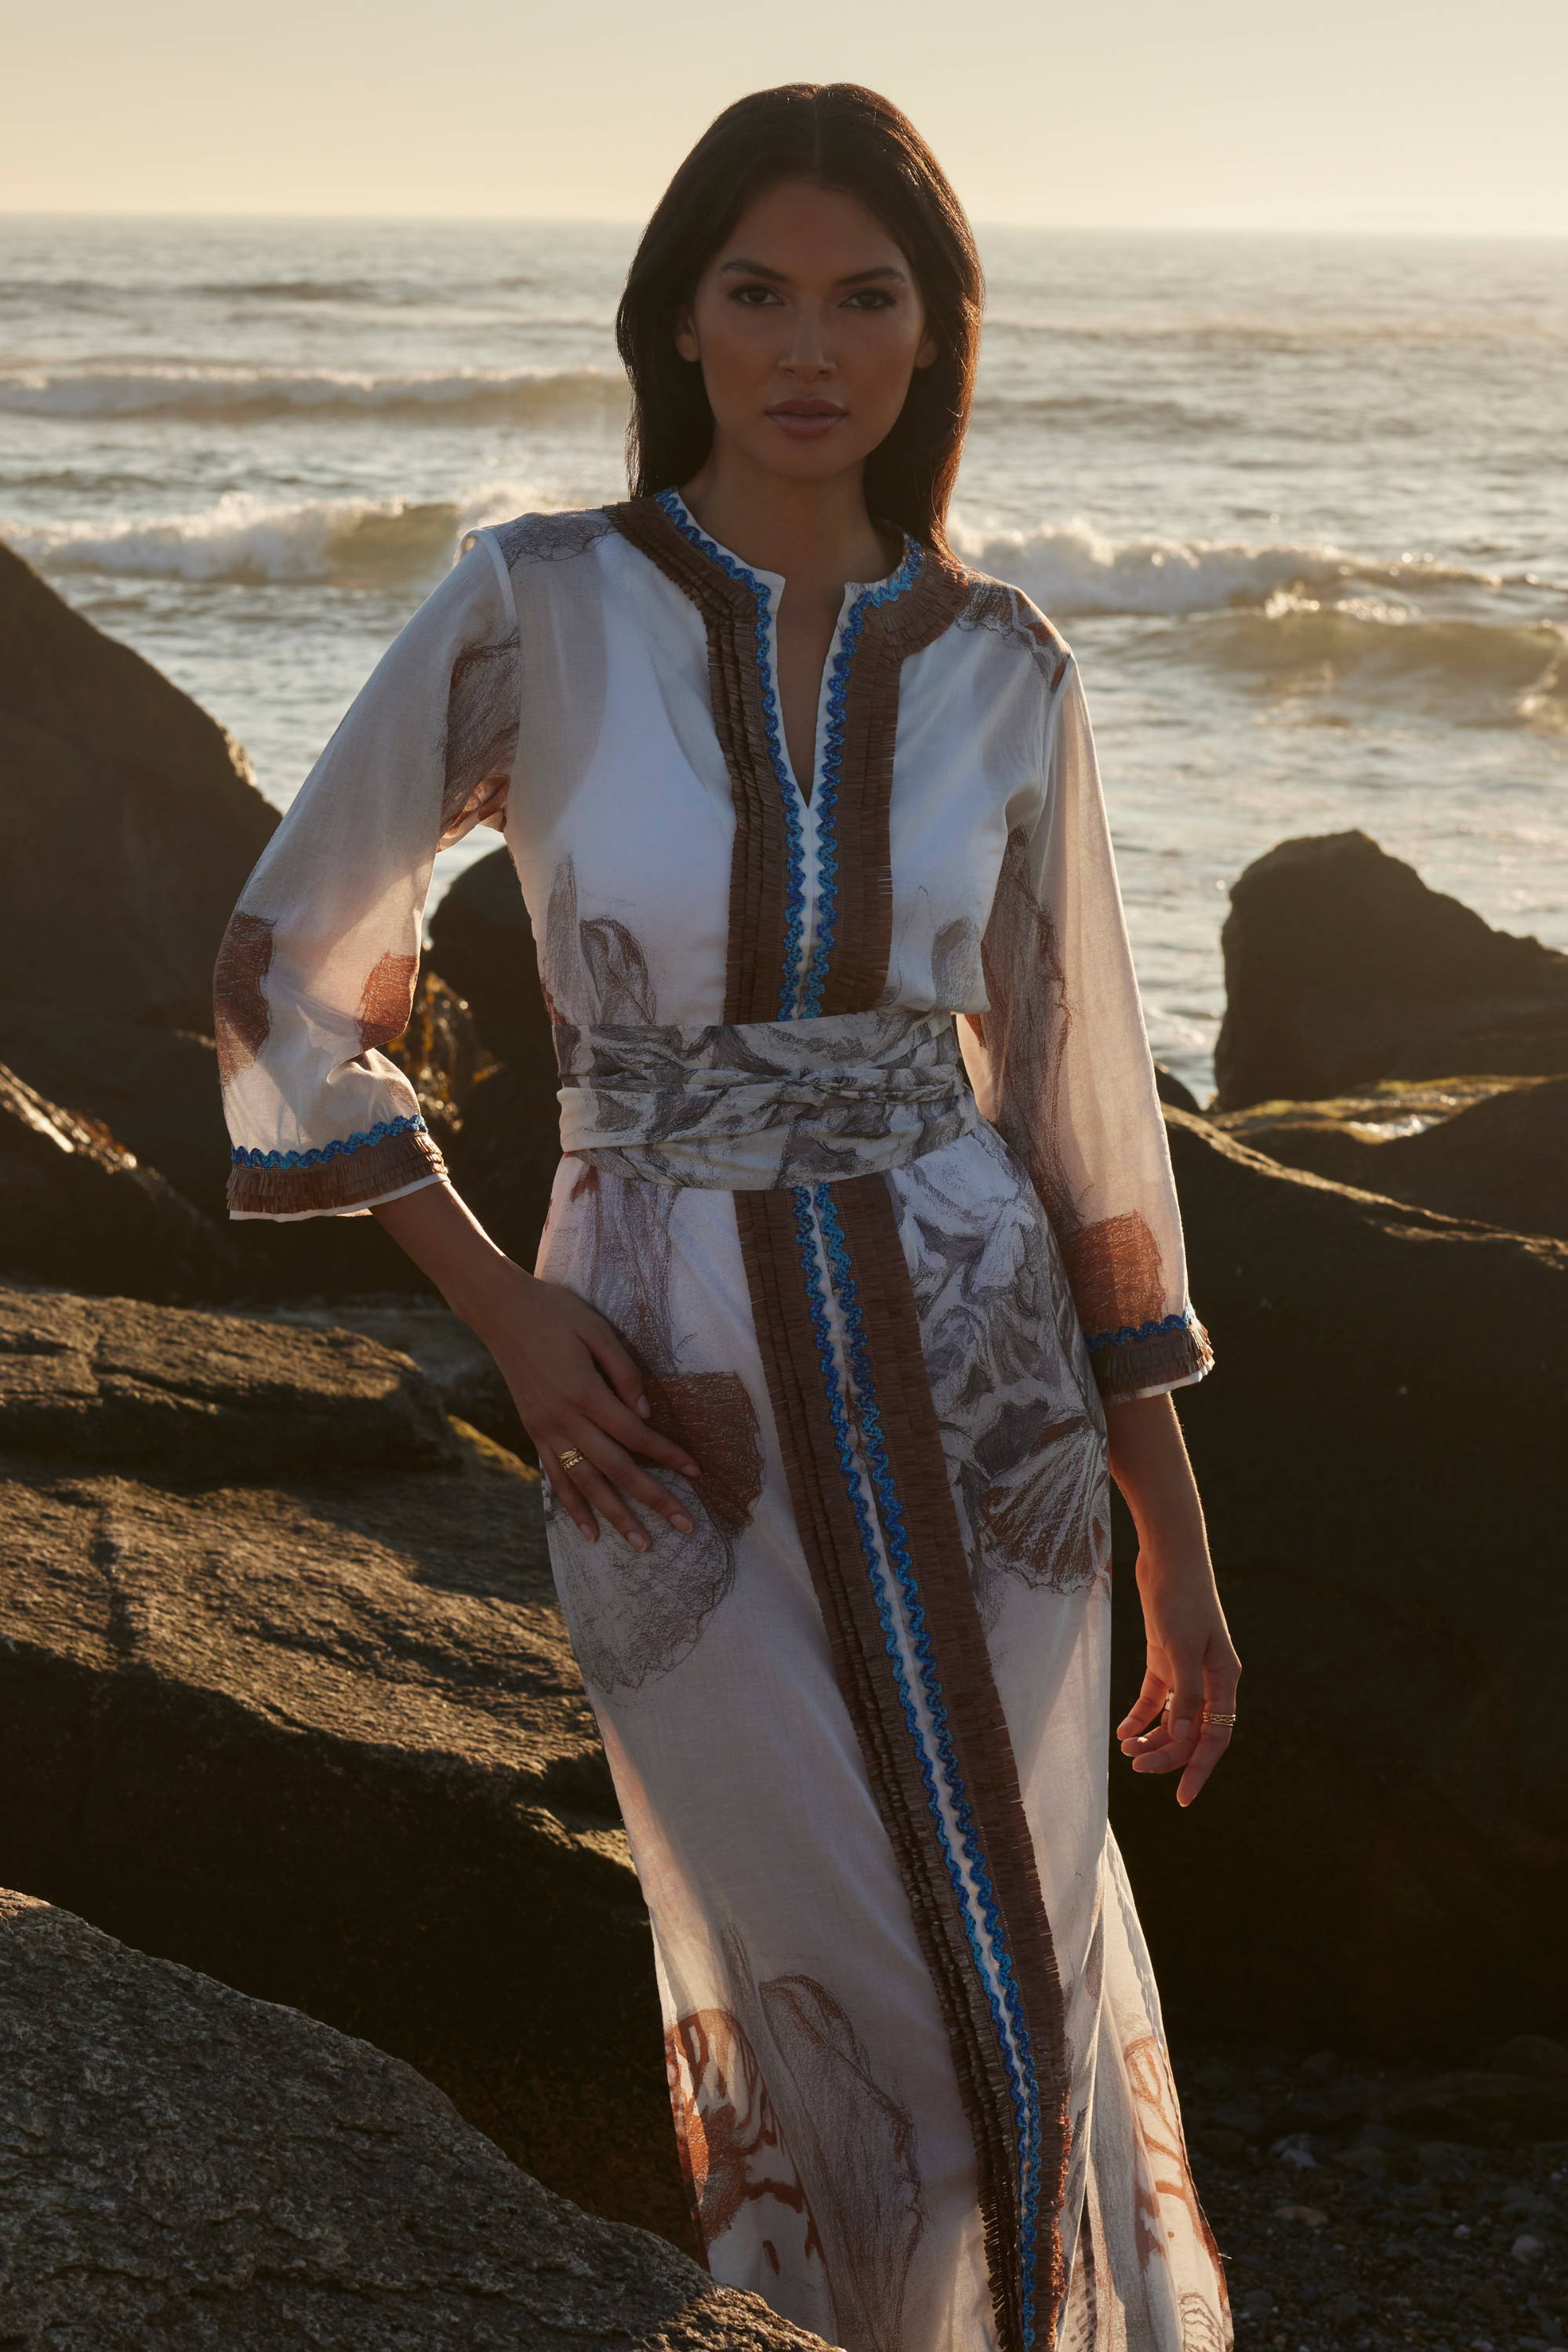 Woman wearing cotton kaftan with matching belt by the ocean by Ala von Auersperg